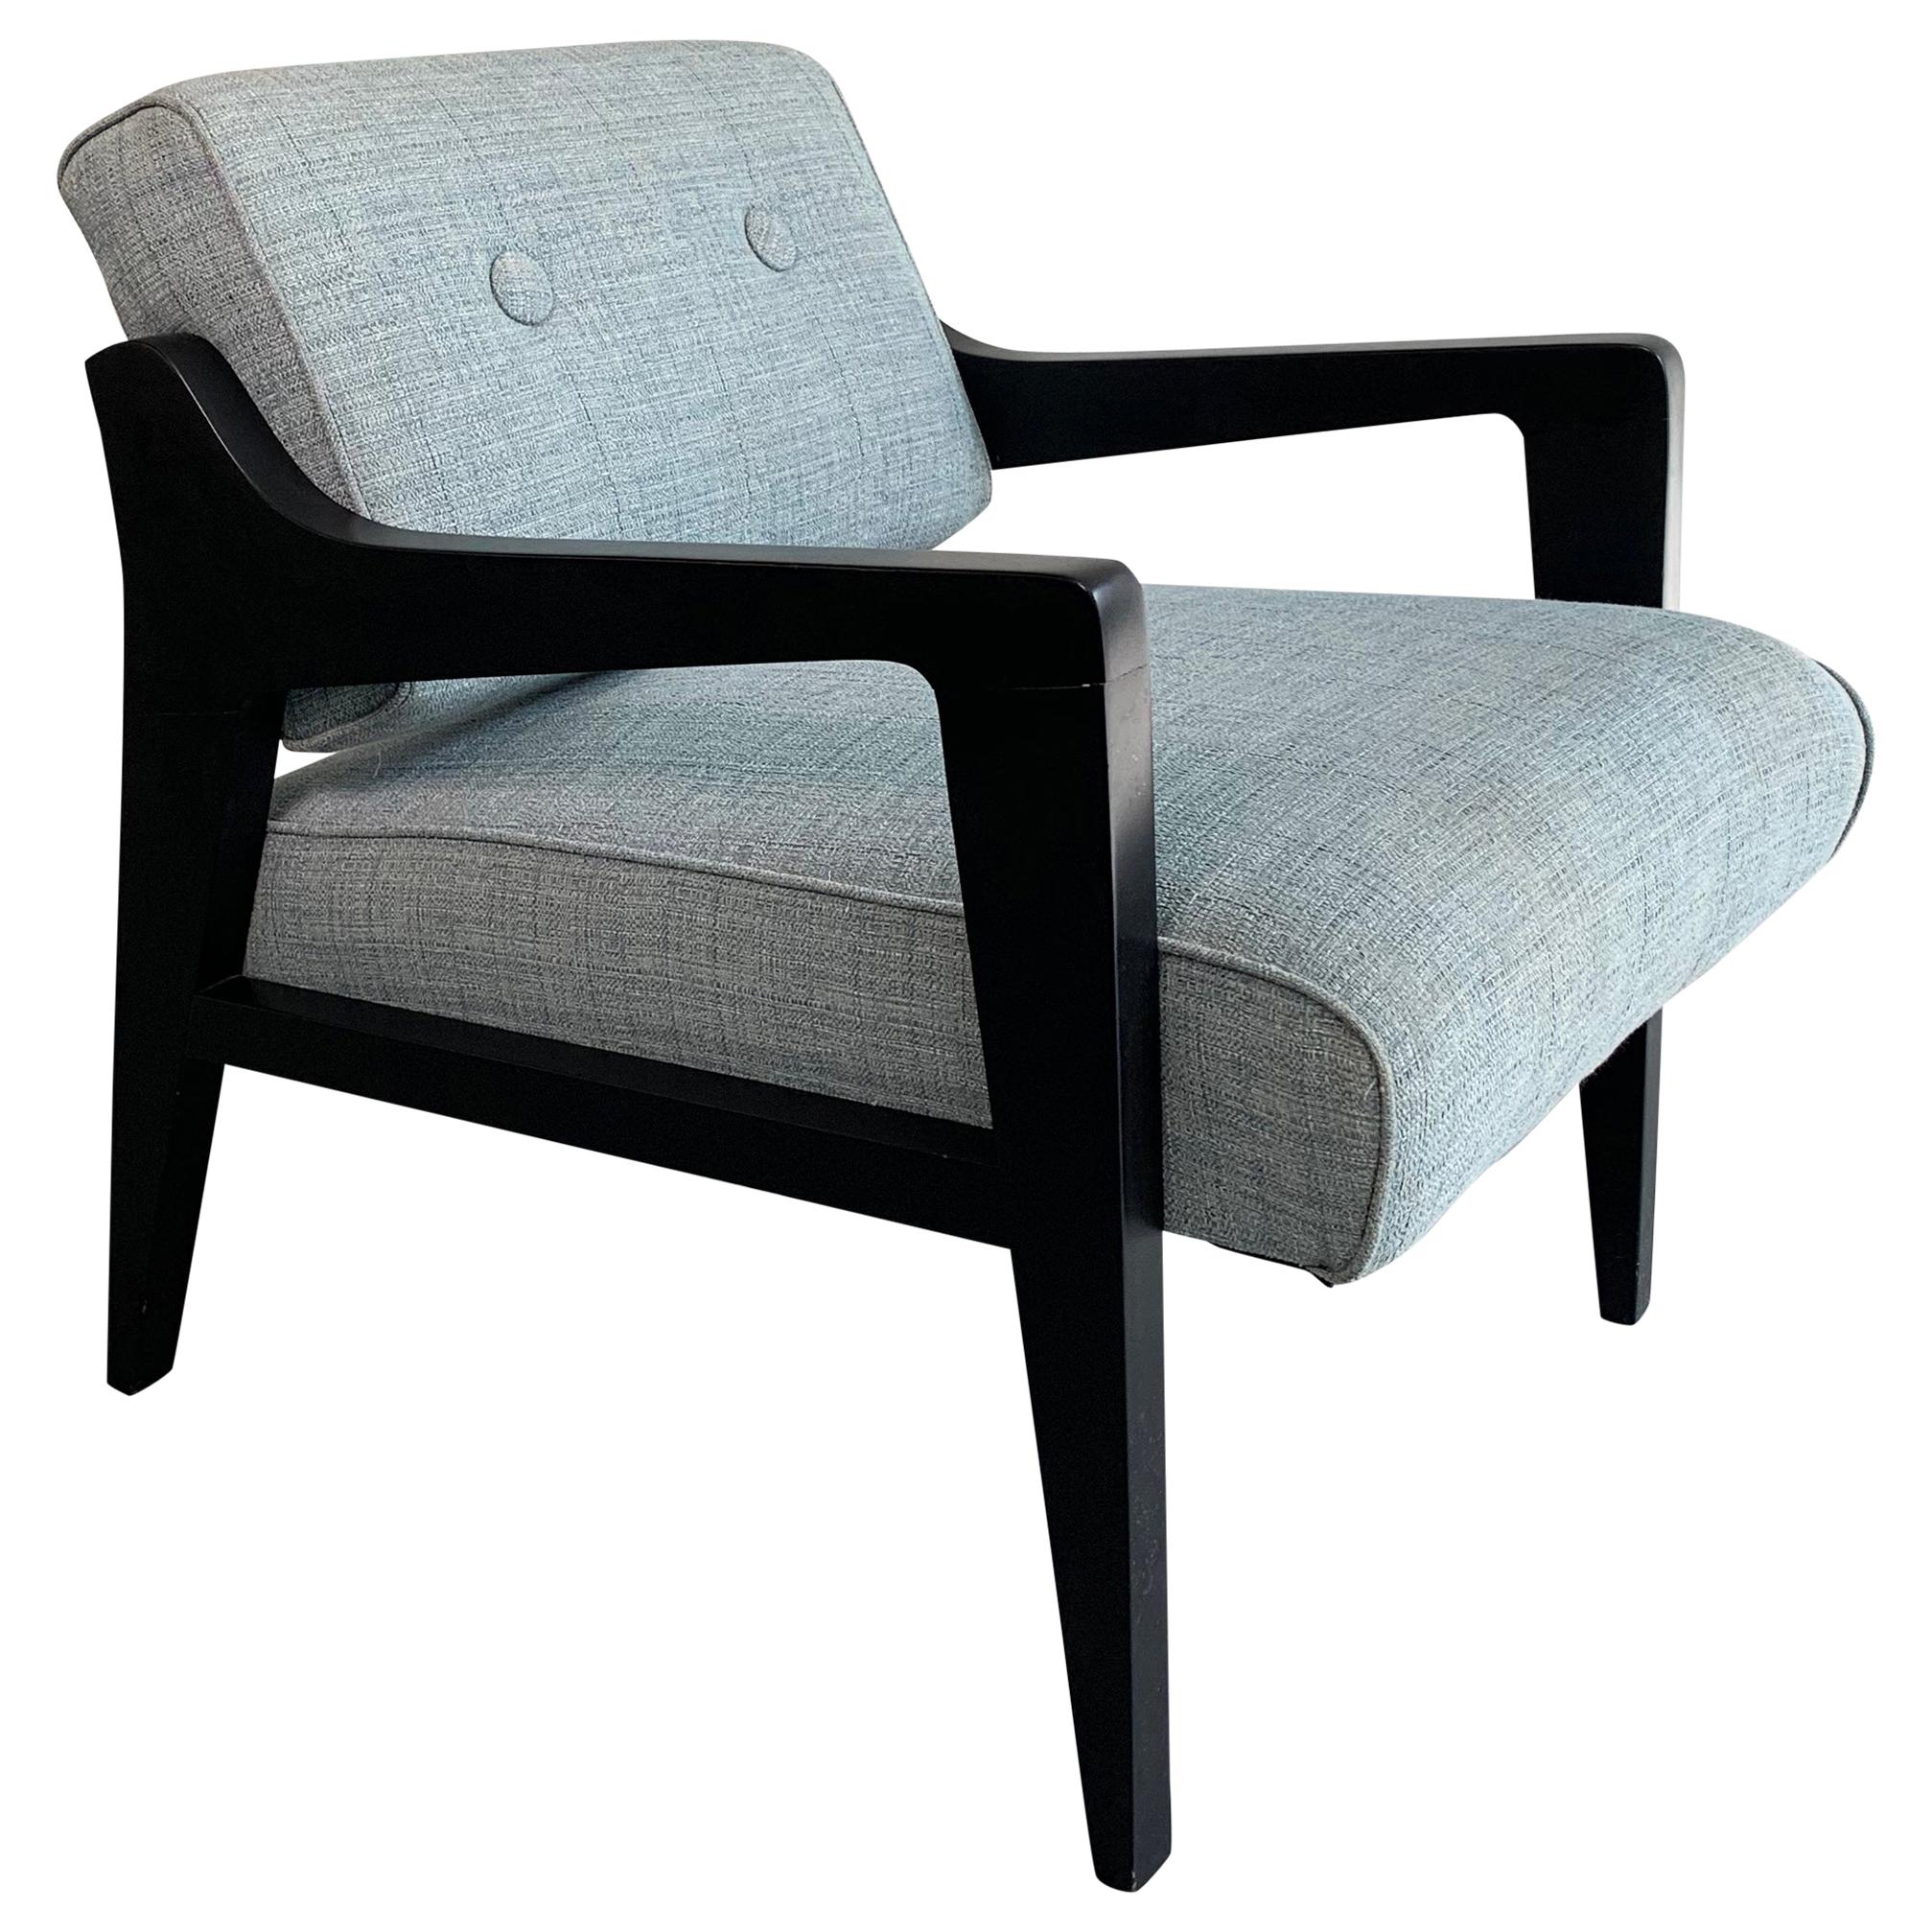 Black Lacquered Lounge Chair by Edward Wormley for Dunbar